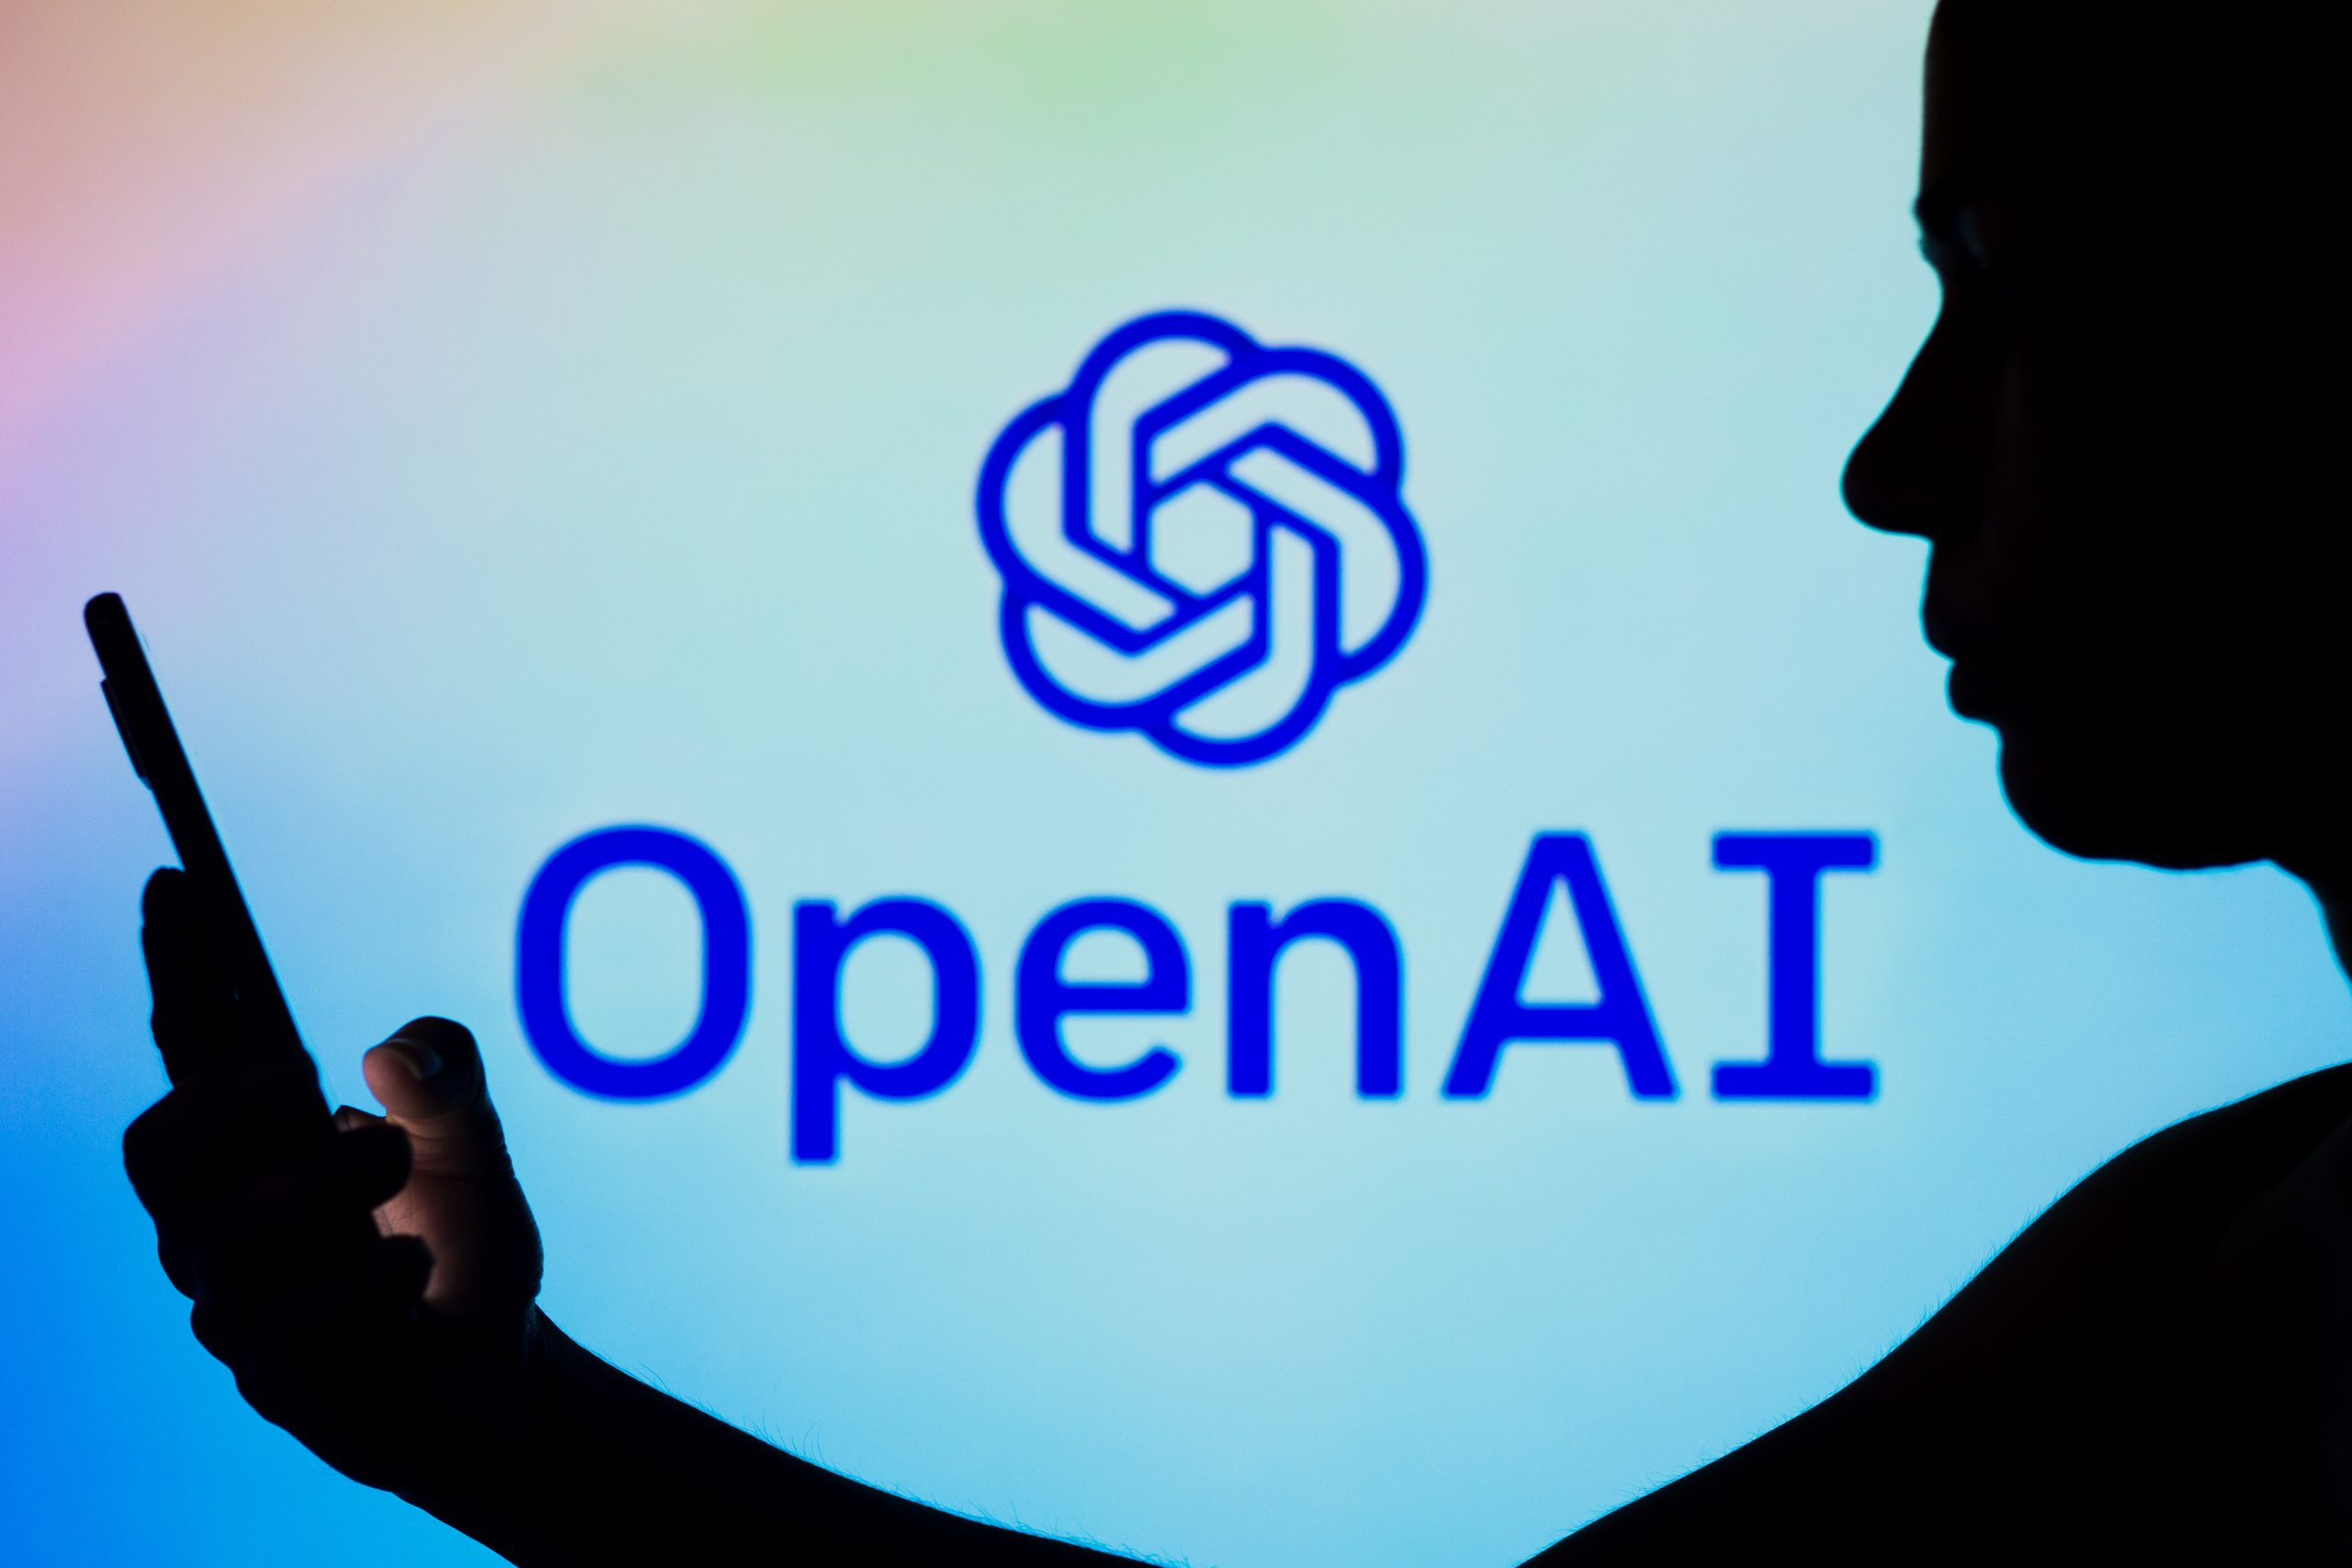 OpenAI enters Google-dominated search market with SearchGPT